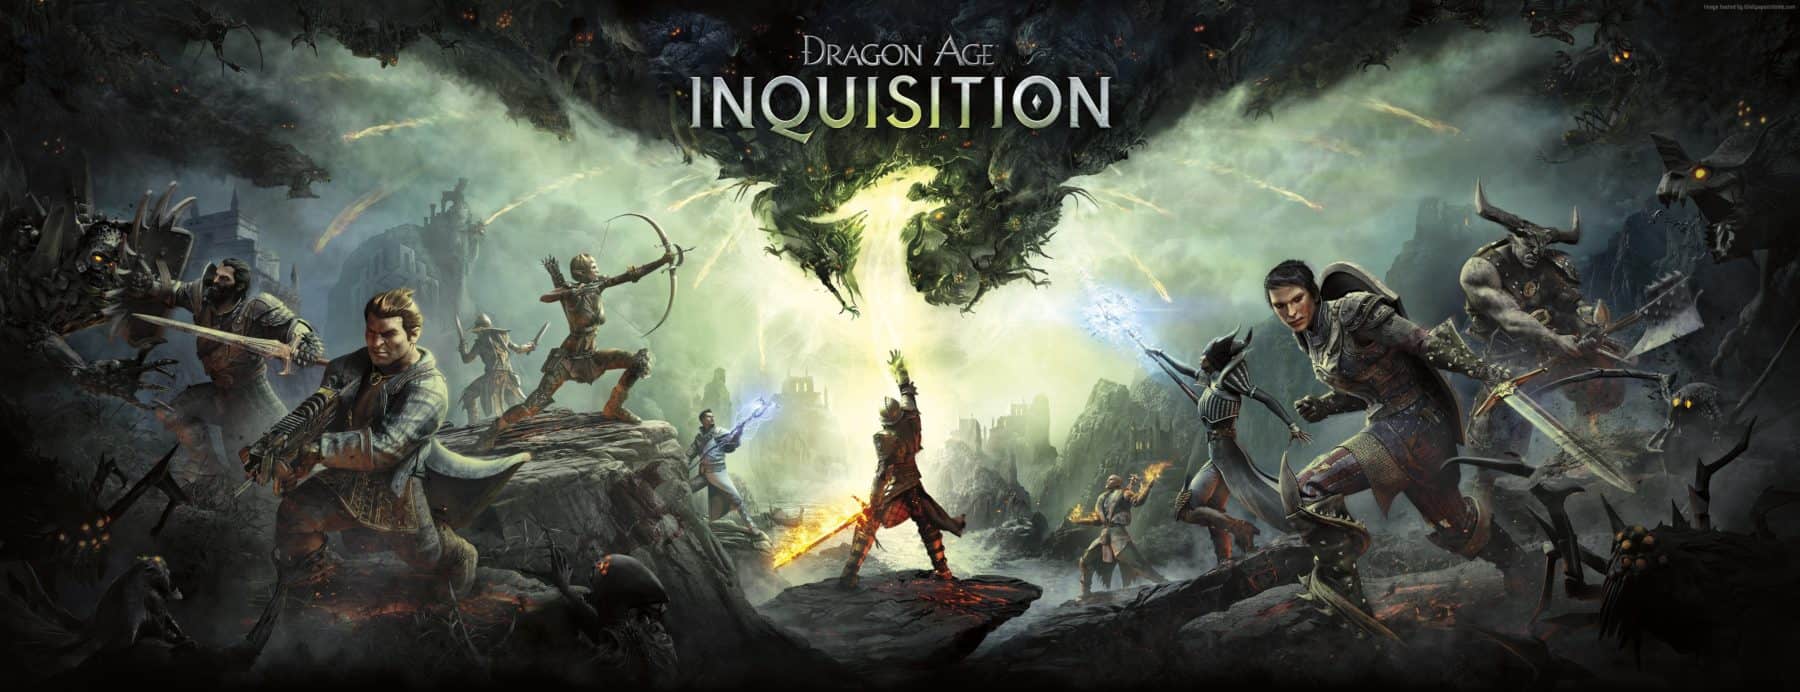 xbox-one-dragon-age-inquisition-gameplay-inquisition-cheats-more-for-xbox-one-x1-cheats